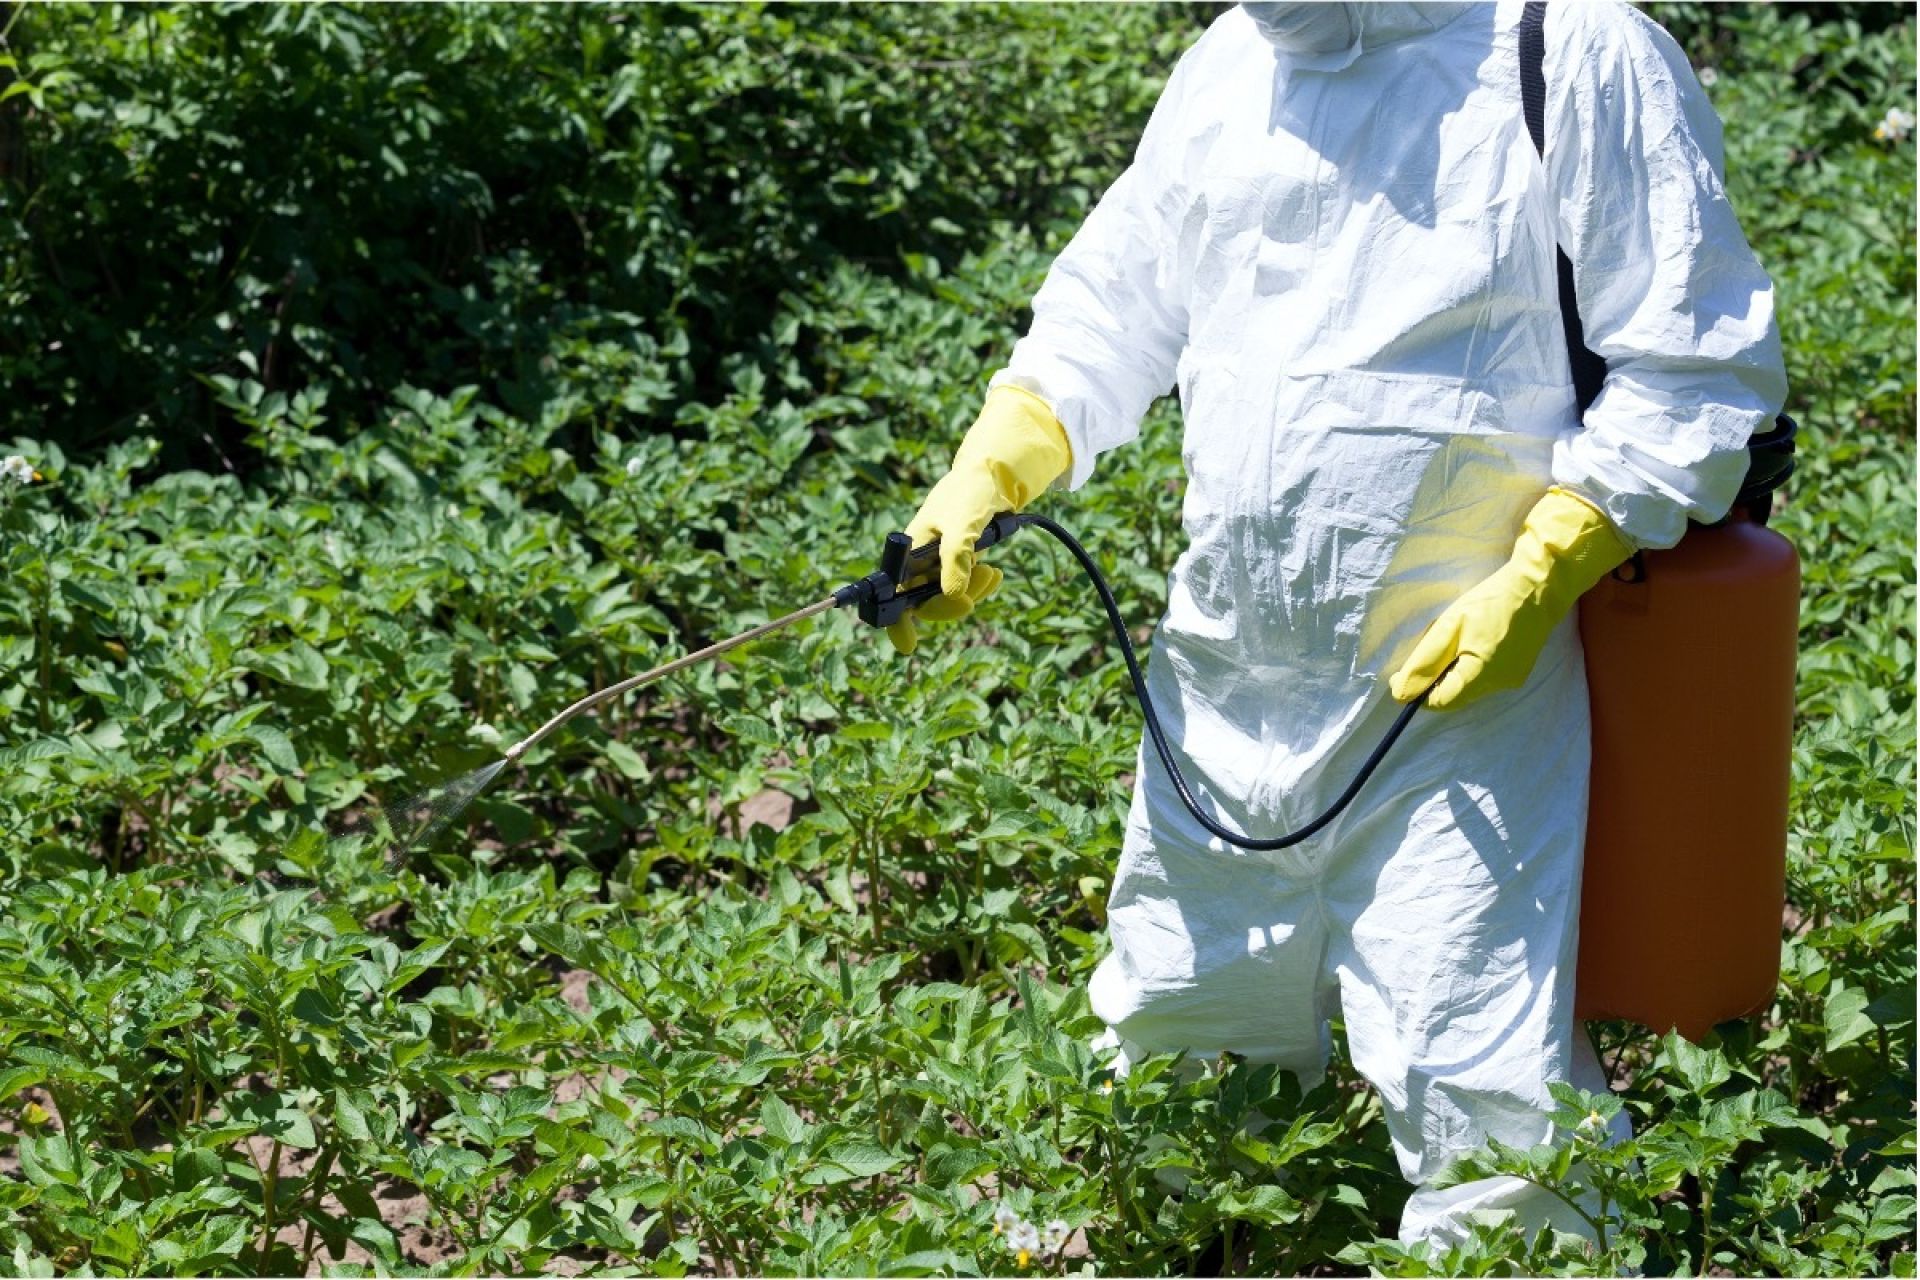 Person in protective suit spraying pesticides on a plant.